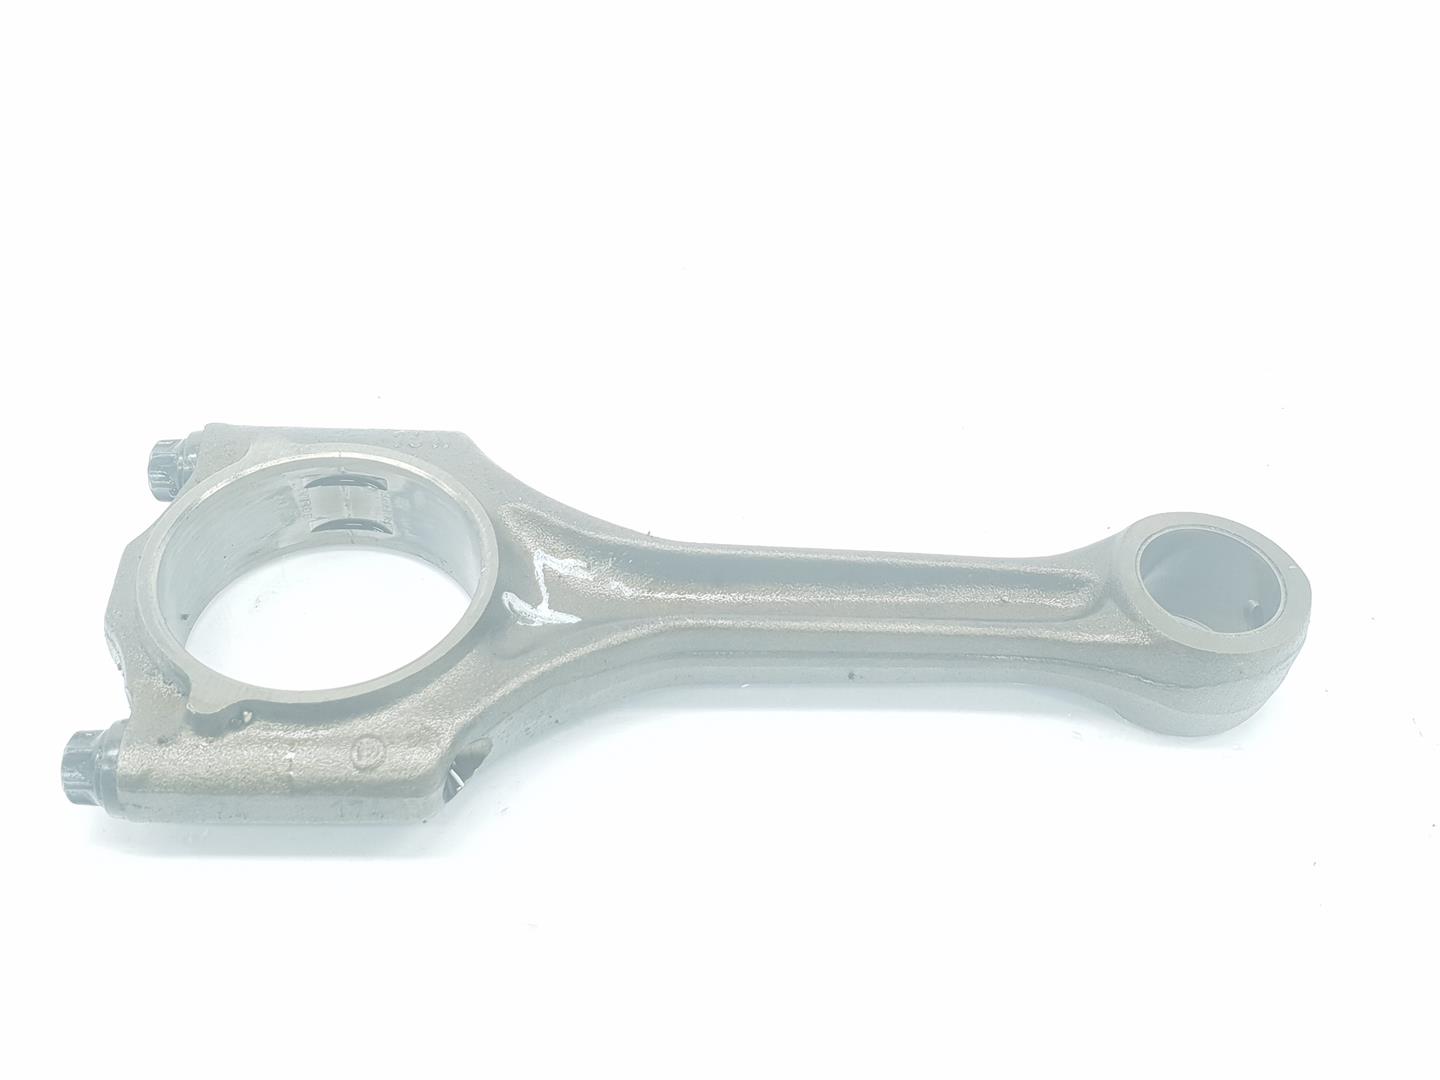 BMW 3 Series E36 (1990-2000) Connecting Rod 11241437617, 11241437617, 1111AA 24233730